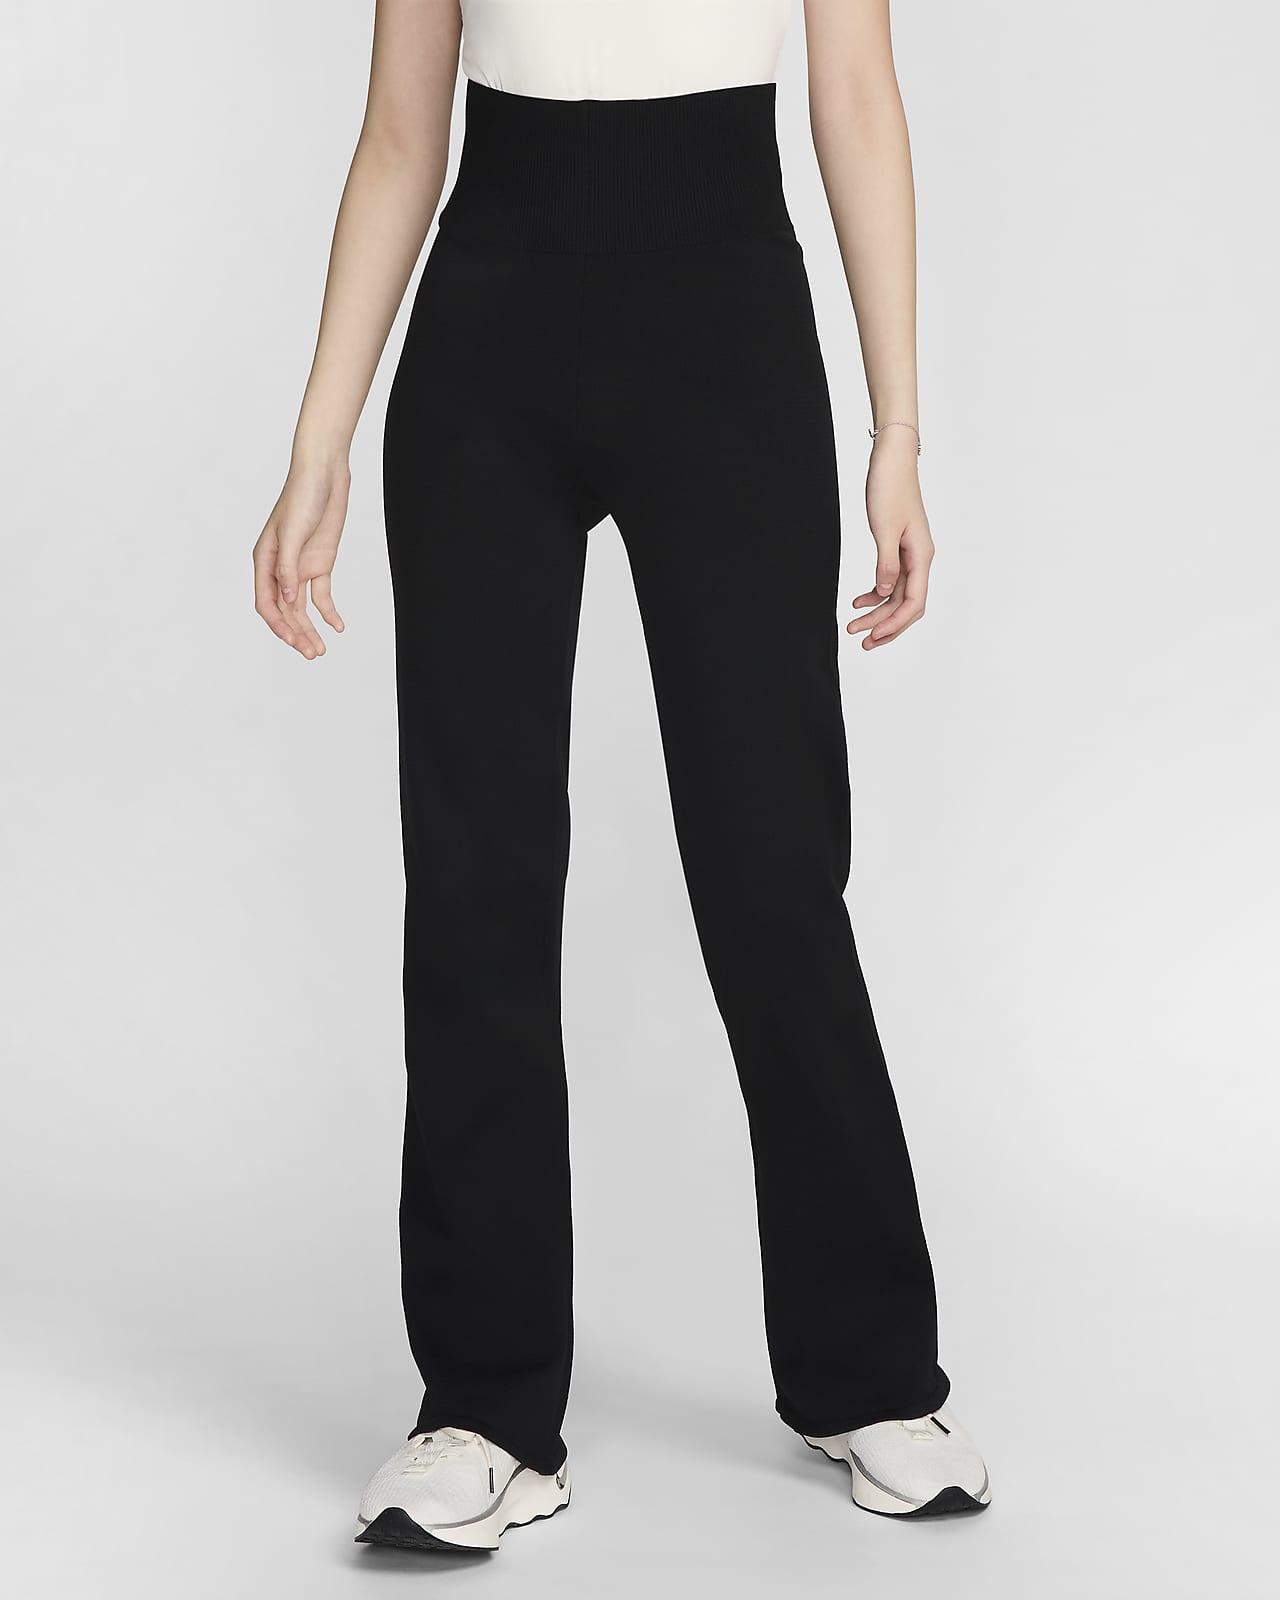 Nike Sportswear Chill Knit Women's Tight High-Waisted Jumper Flared Trousers